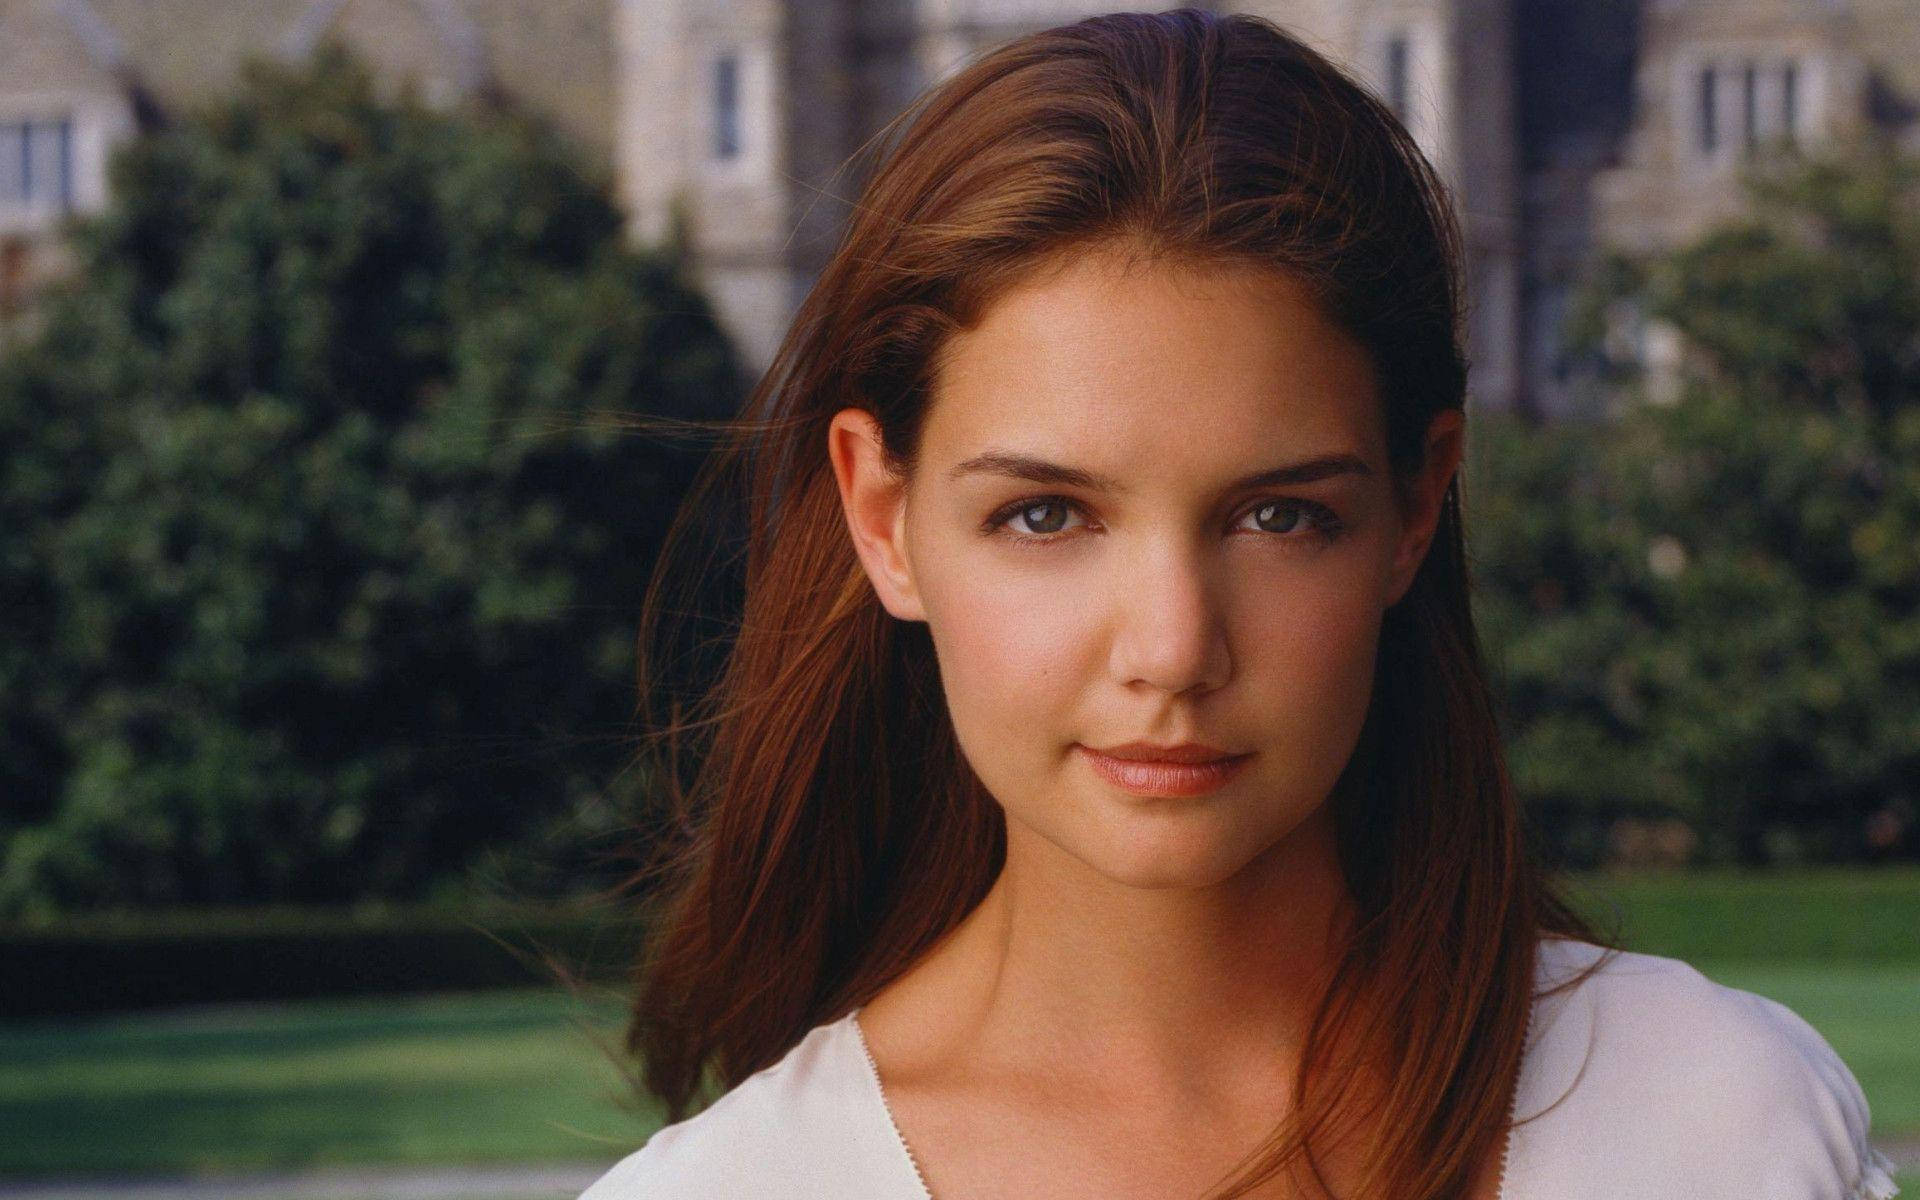 Katie Holmes As Joey Potter From Dawson's Creek Wallpaper